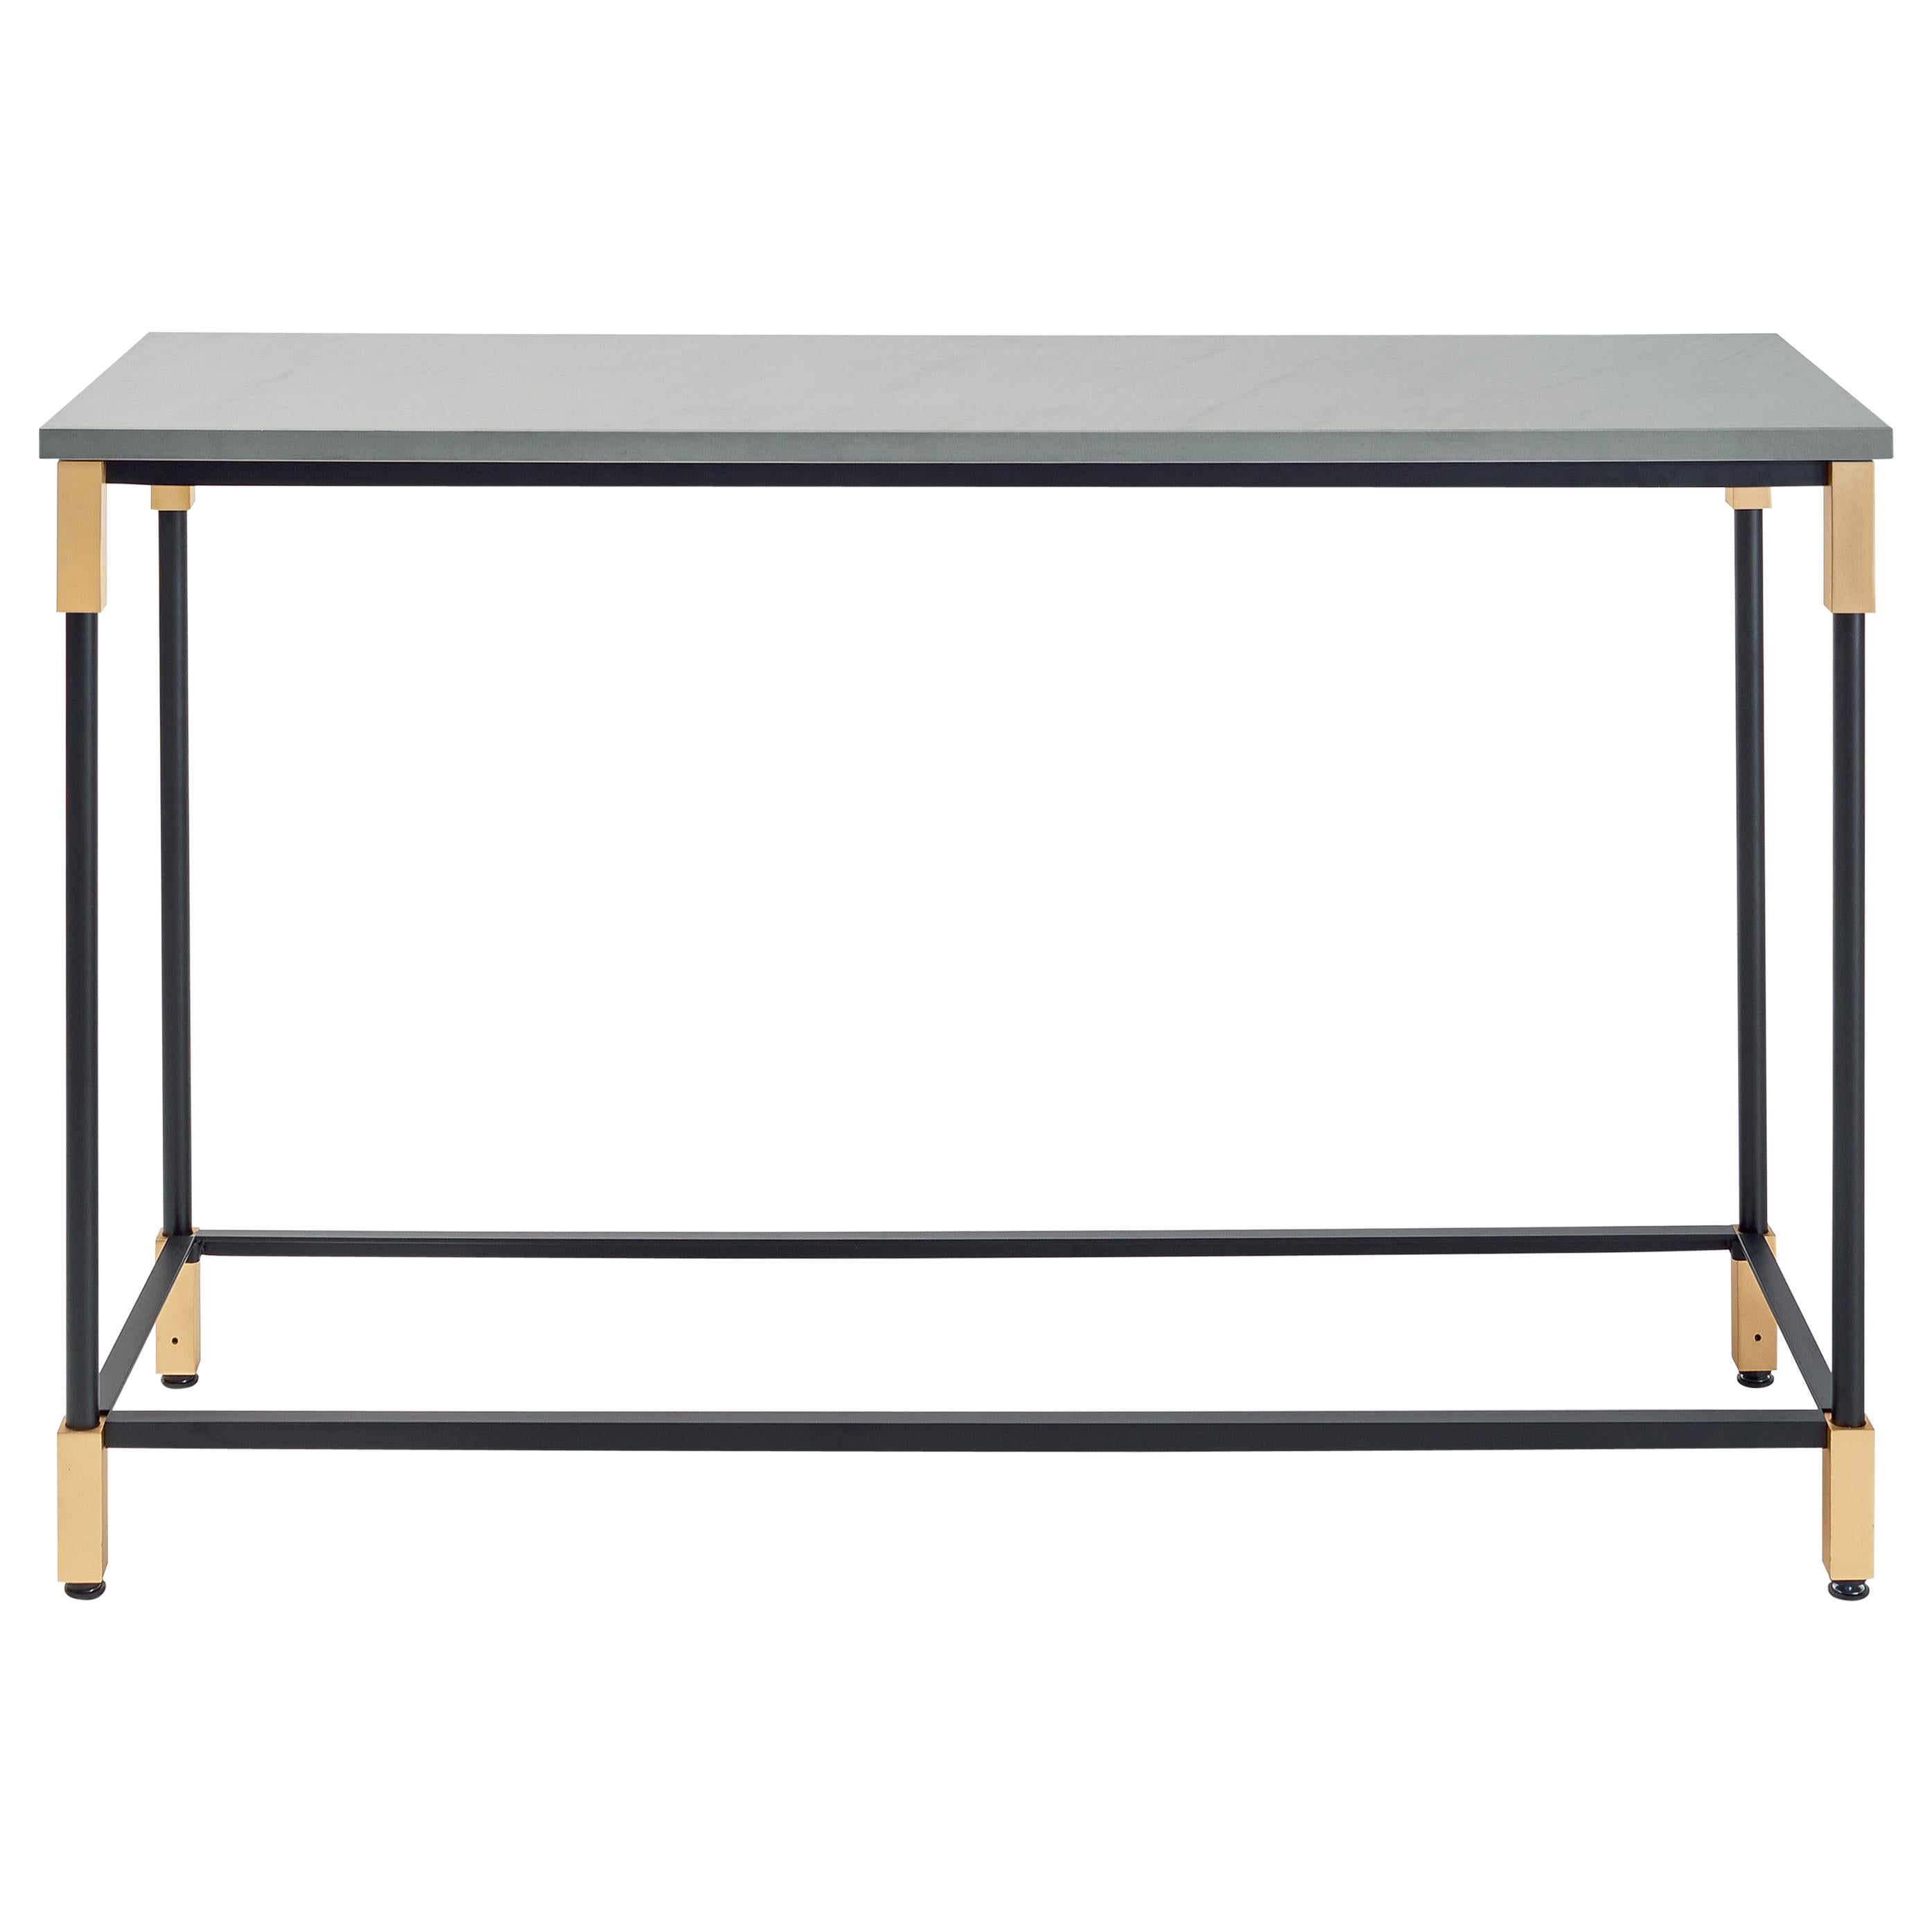 Arflex Match Console Table with Quarzite Silver Marble Top by Bernhardt & Vella